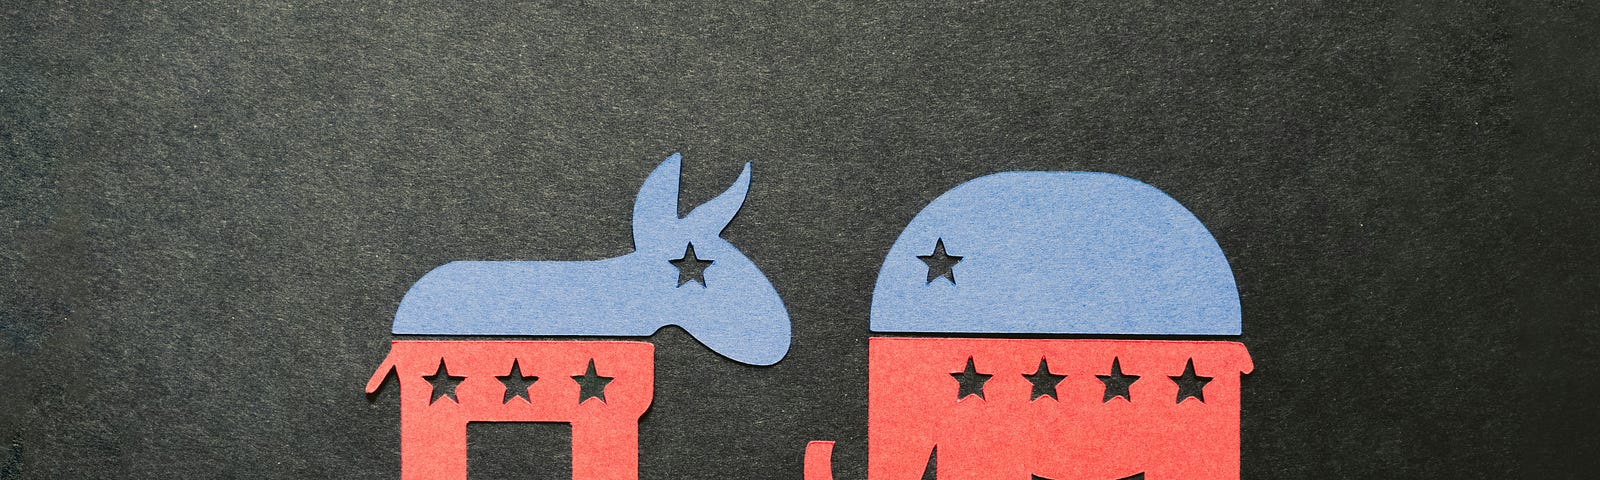 Republican elephant and Democrat donkey against gray background.